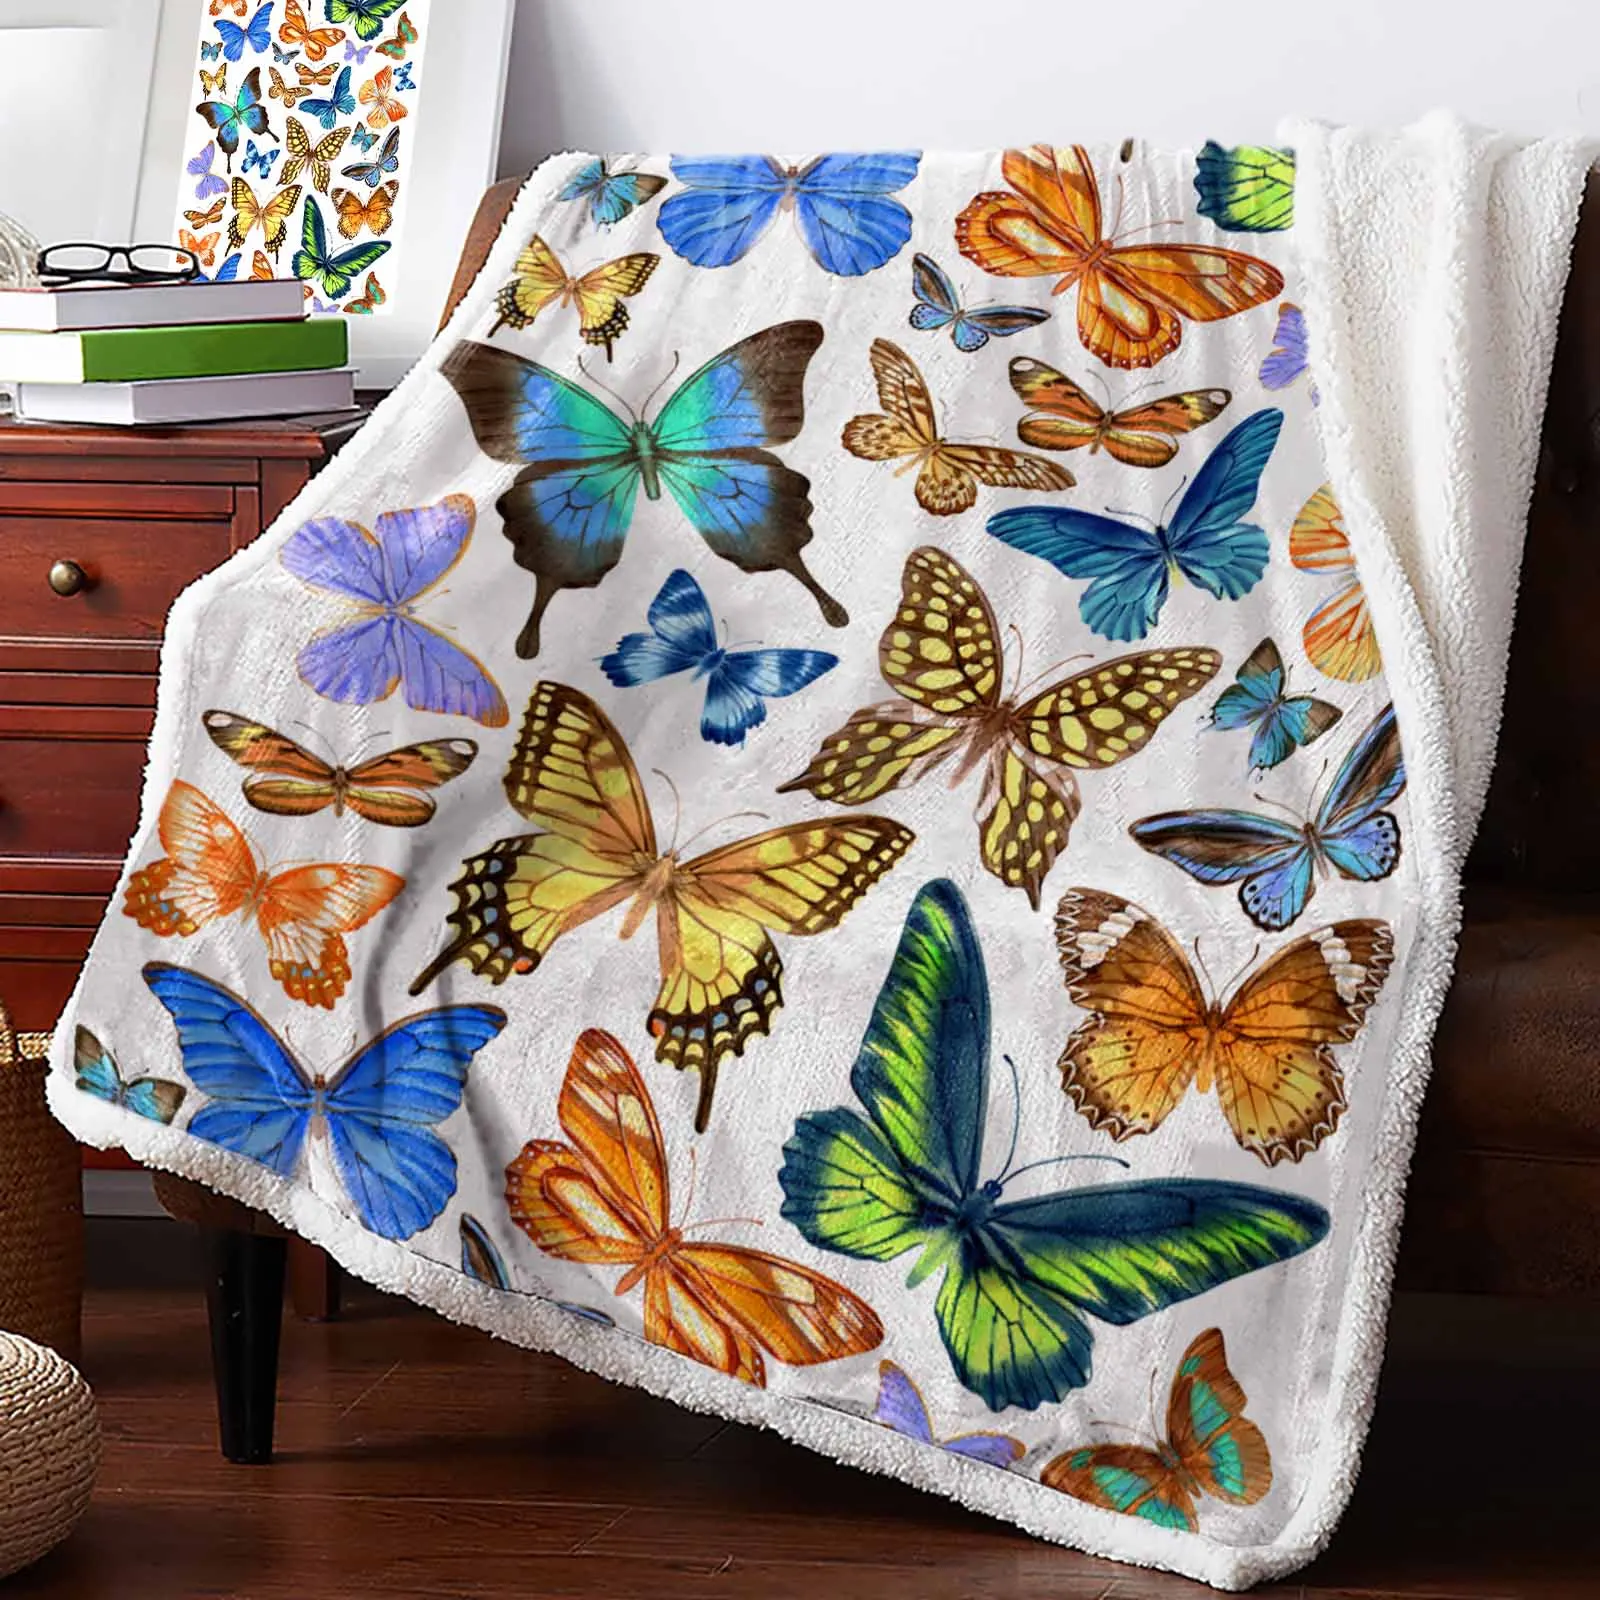 

Vintage Watercolor Butterfly Texture Cashmere Blanket Warm Winter Soft Throw Blankets for Beds Sofa Wool Blanket Bedspread